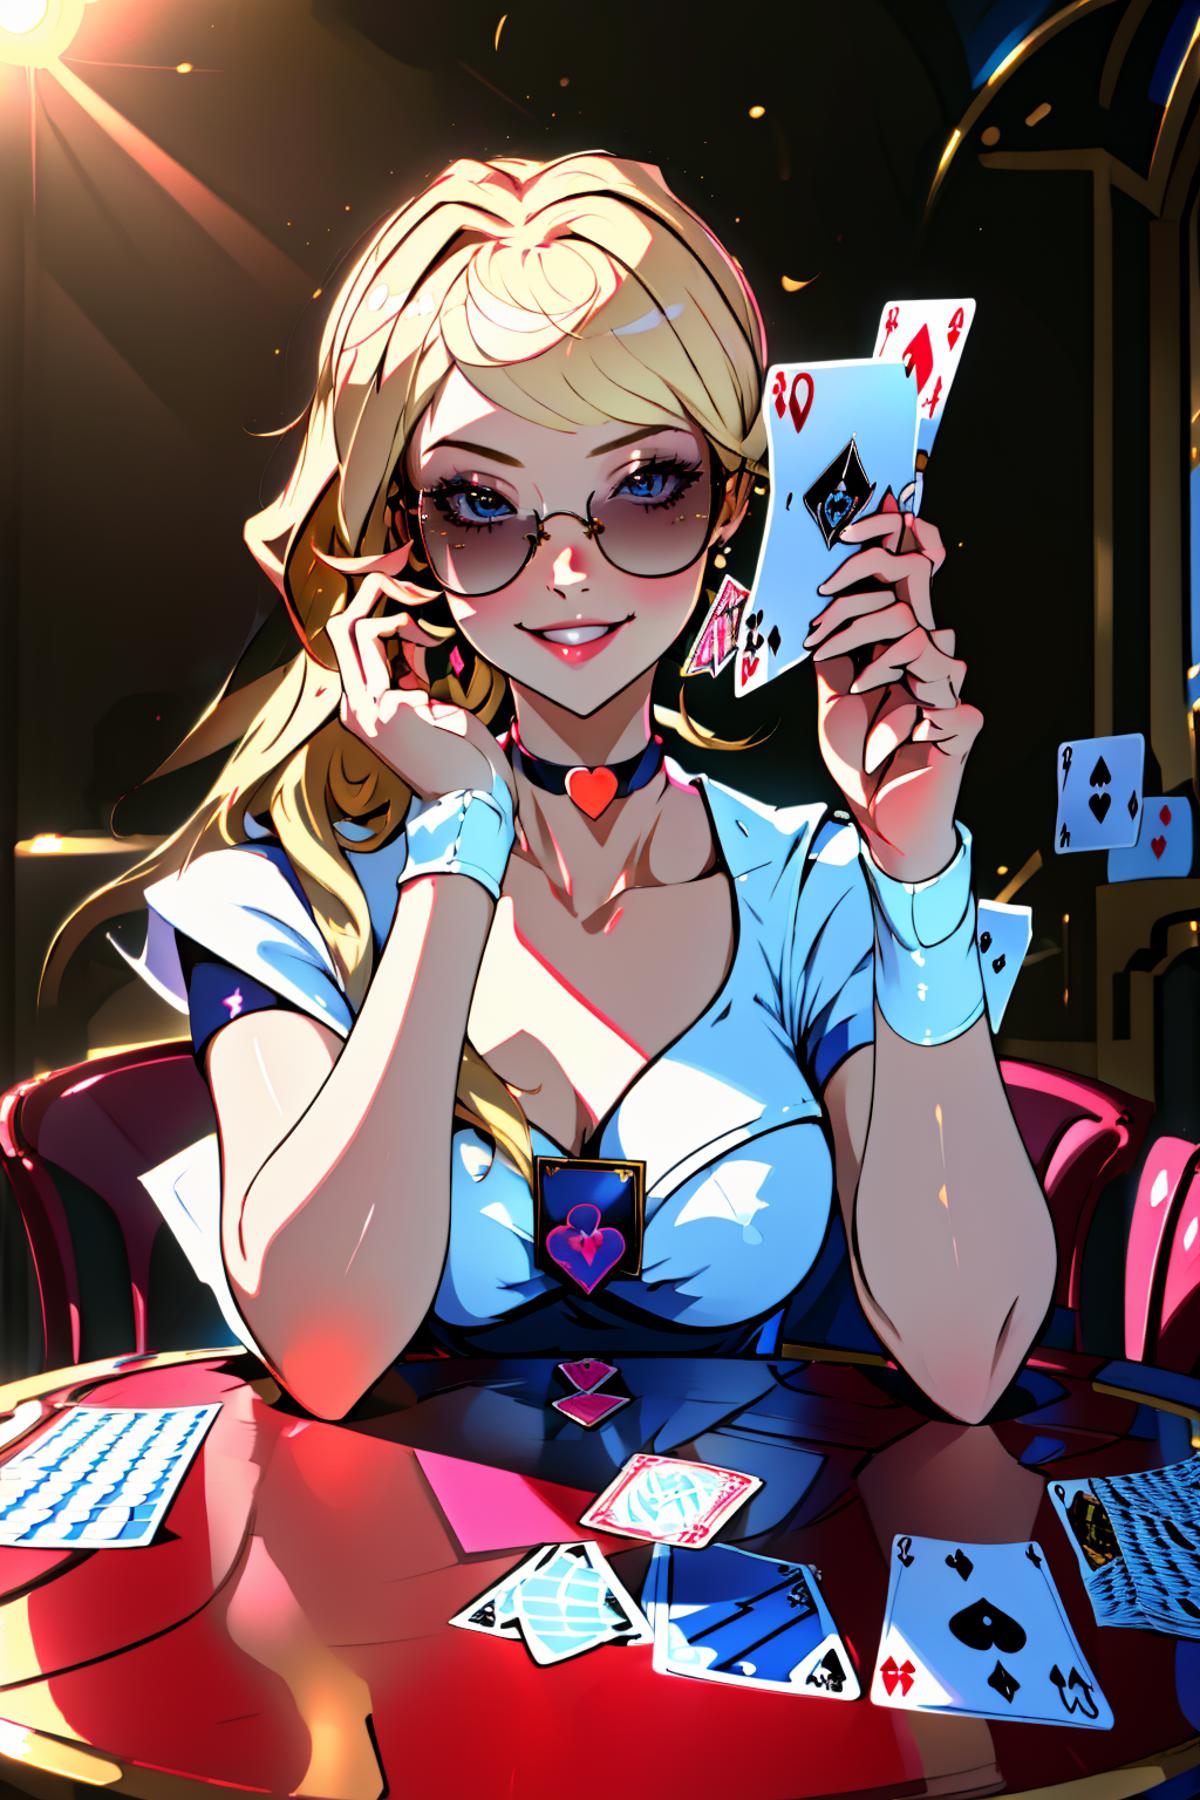 Playing Cards | Concept LoRA image by EDG